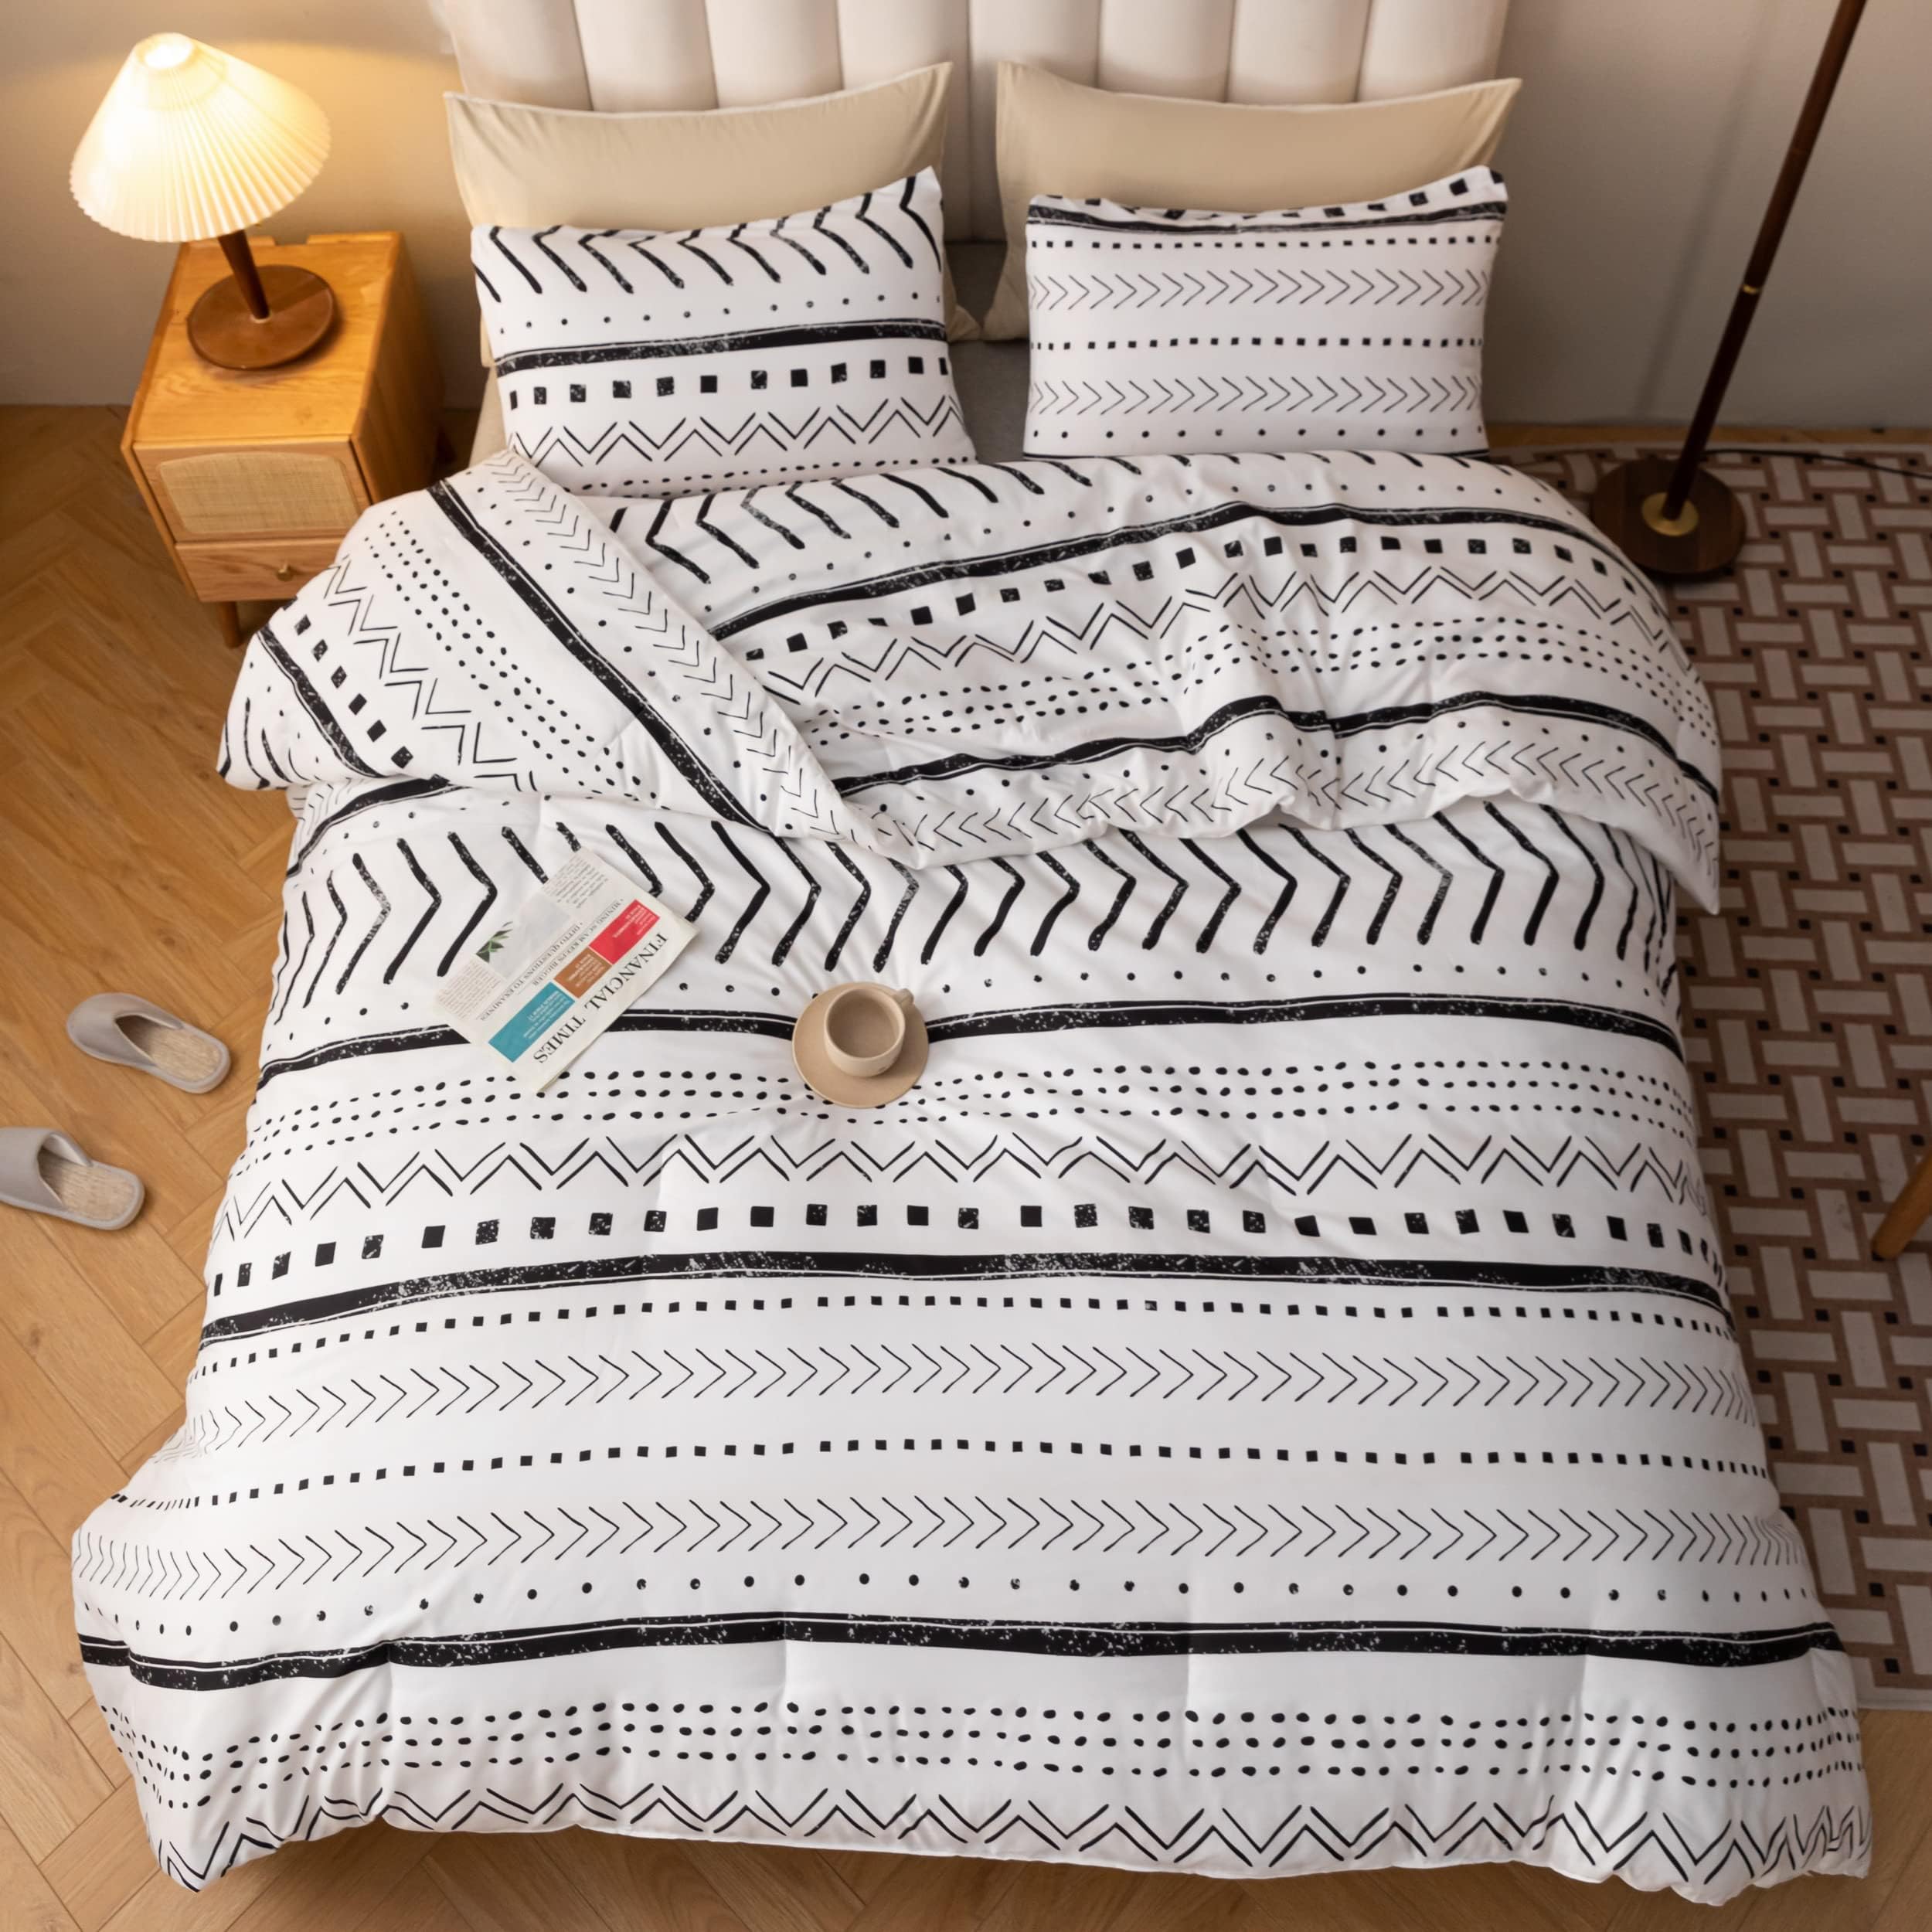 Smoofy Aztec White Bedding Sets Queen Size, Folkloric Art Pattern Boho Aztec Comforter Set with Soft Microfiber Fill Bedding, 1 Comforter 2 Pillowcases